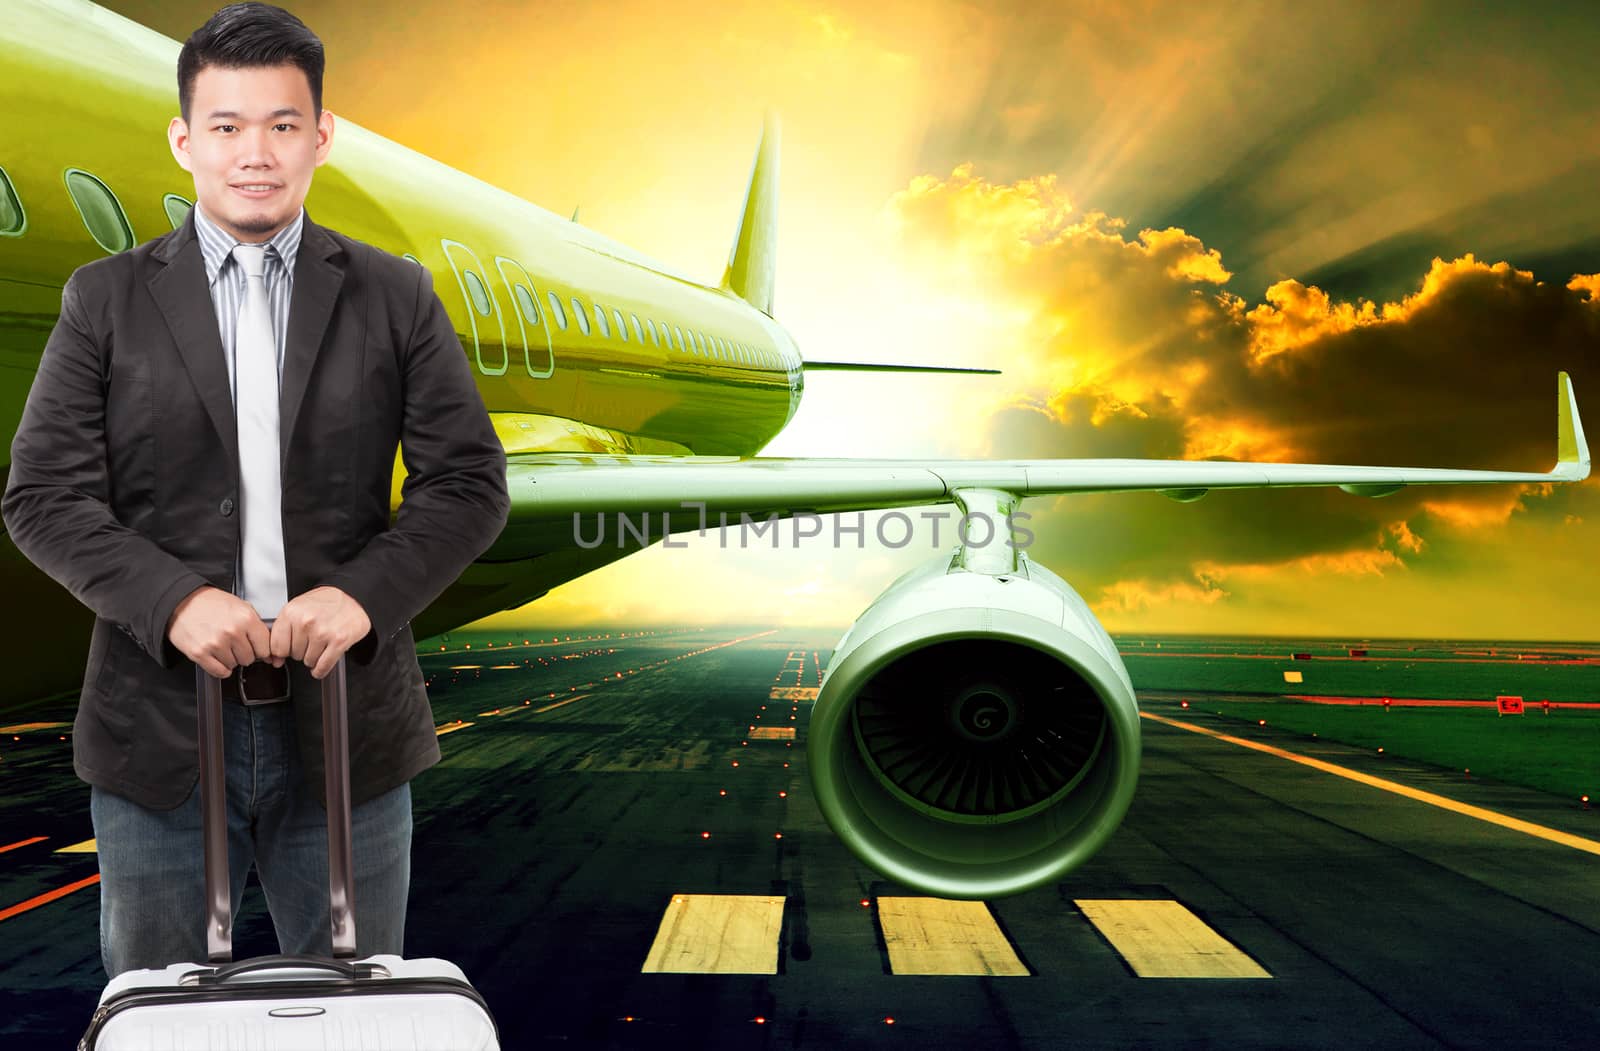 young business man and traveling luggage standing in front of passenger jet plane flying over airport runways use for people journey and air transport occupation